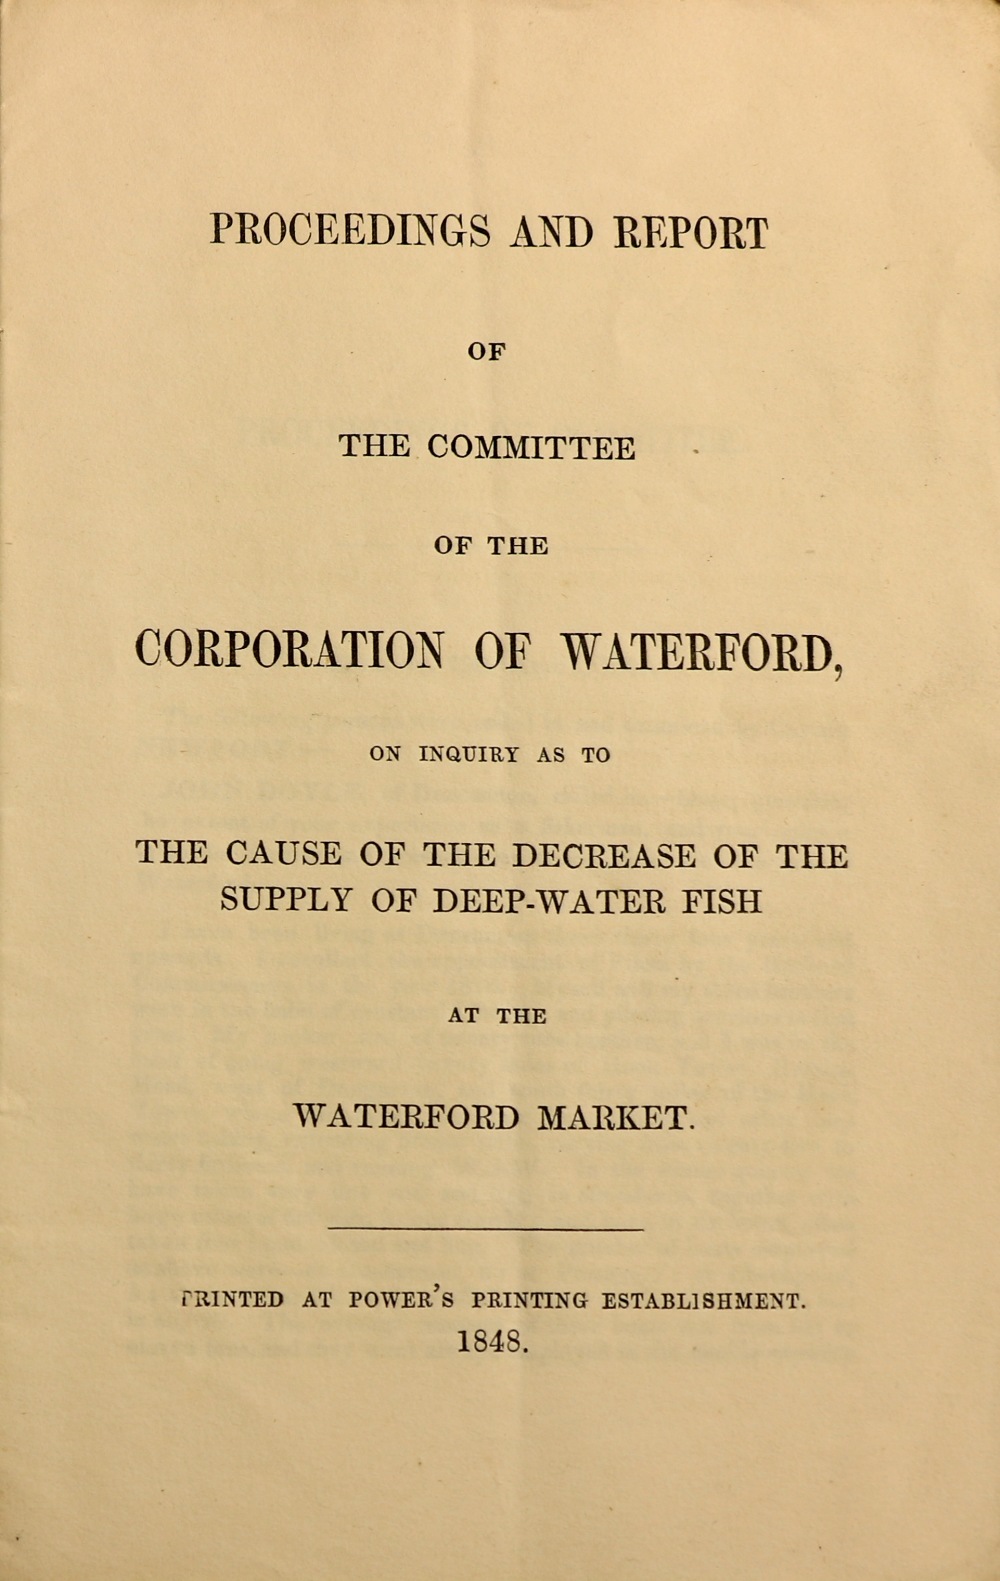 With Manuscript Notes Waterford Corporation: Proceedings and Report of the Committee of the